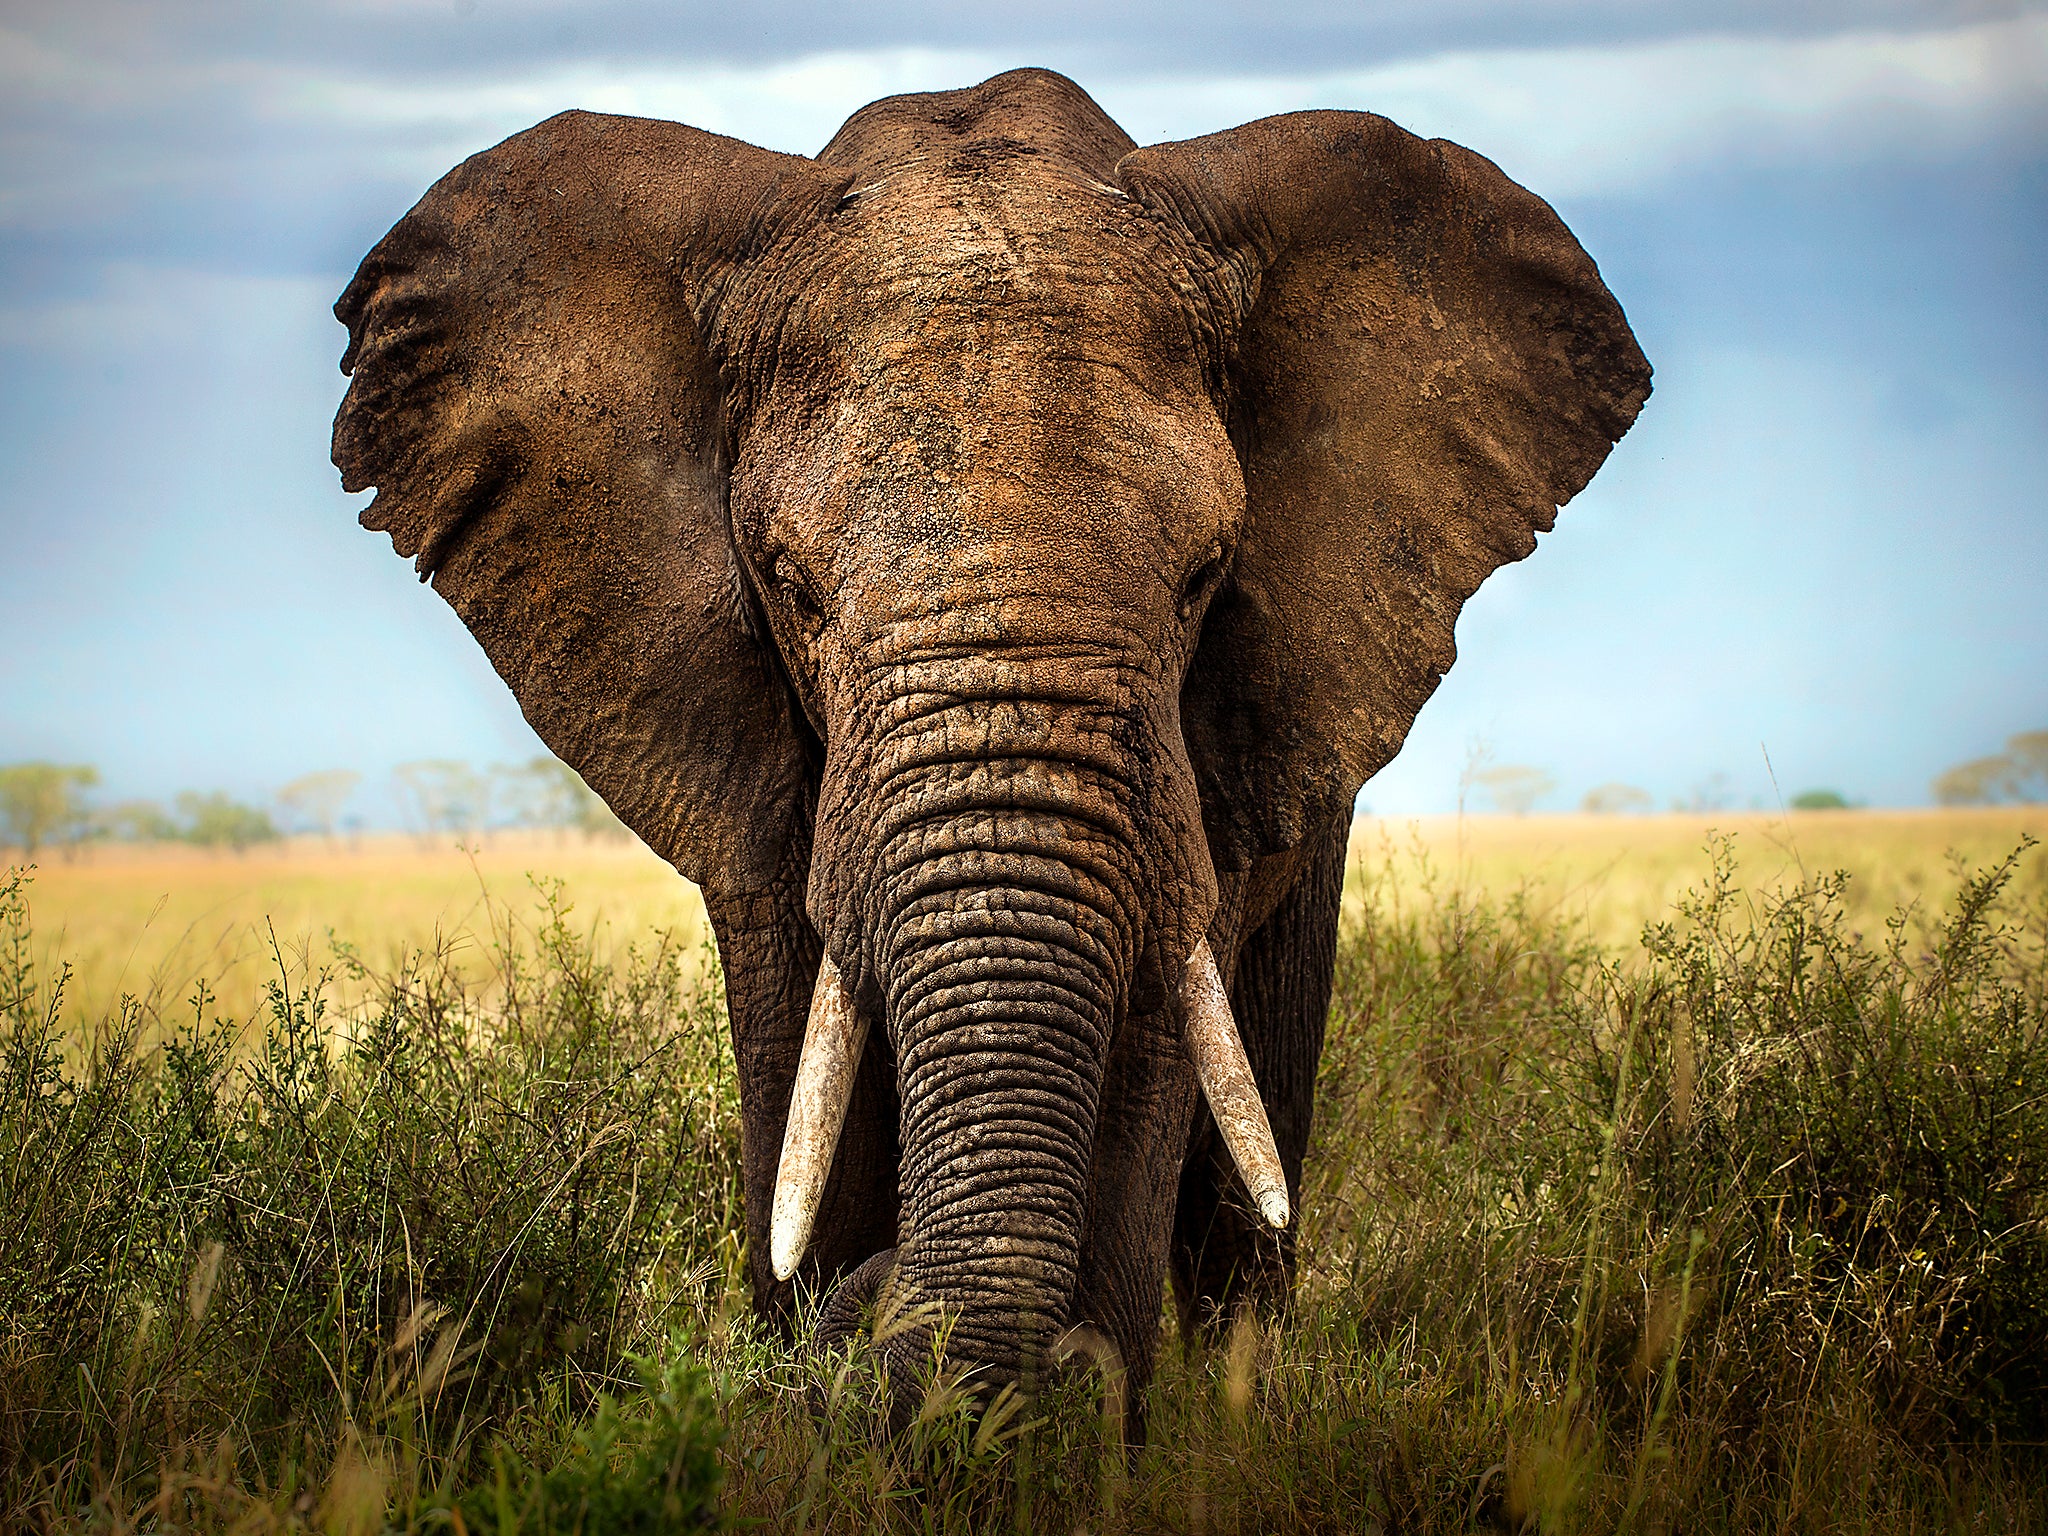 Elephants can have a life span of up to 70 years, although some live even longer than that